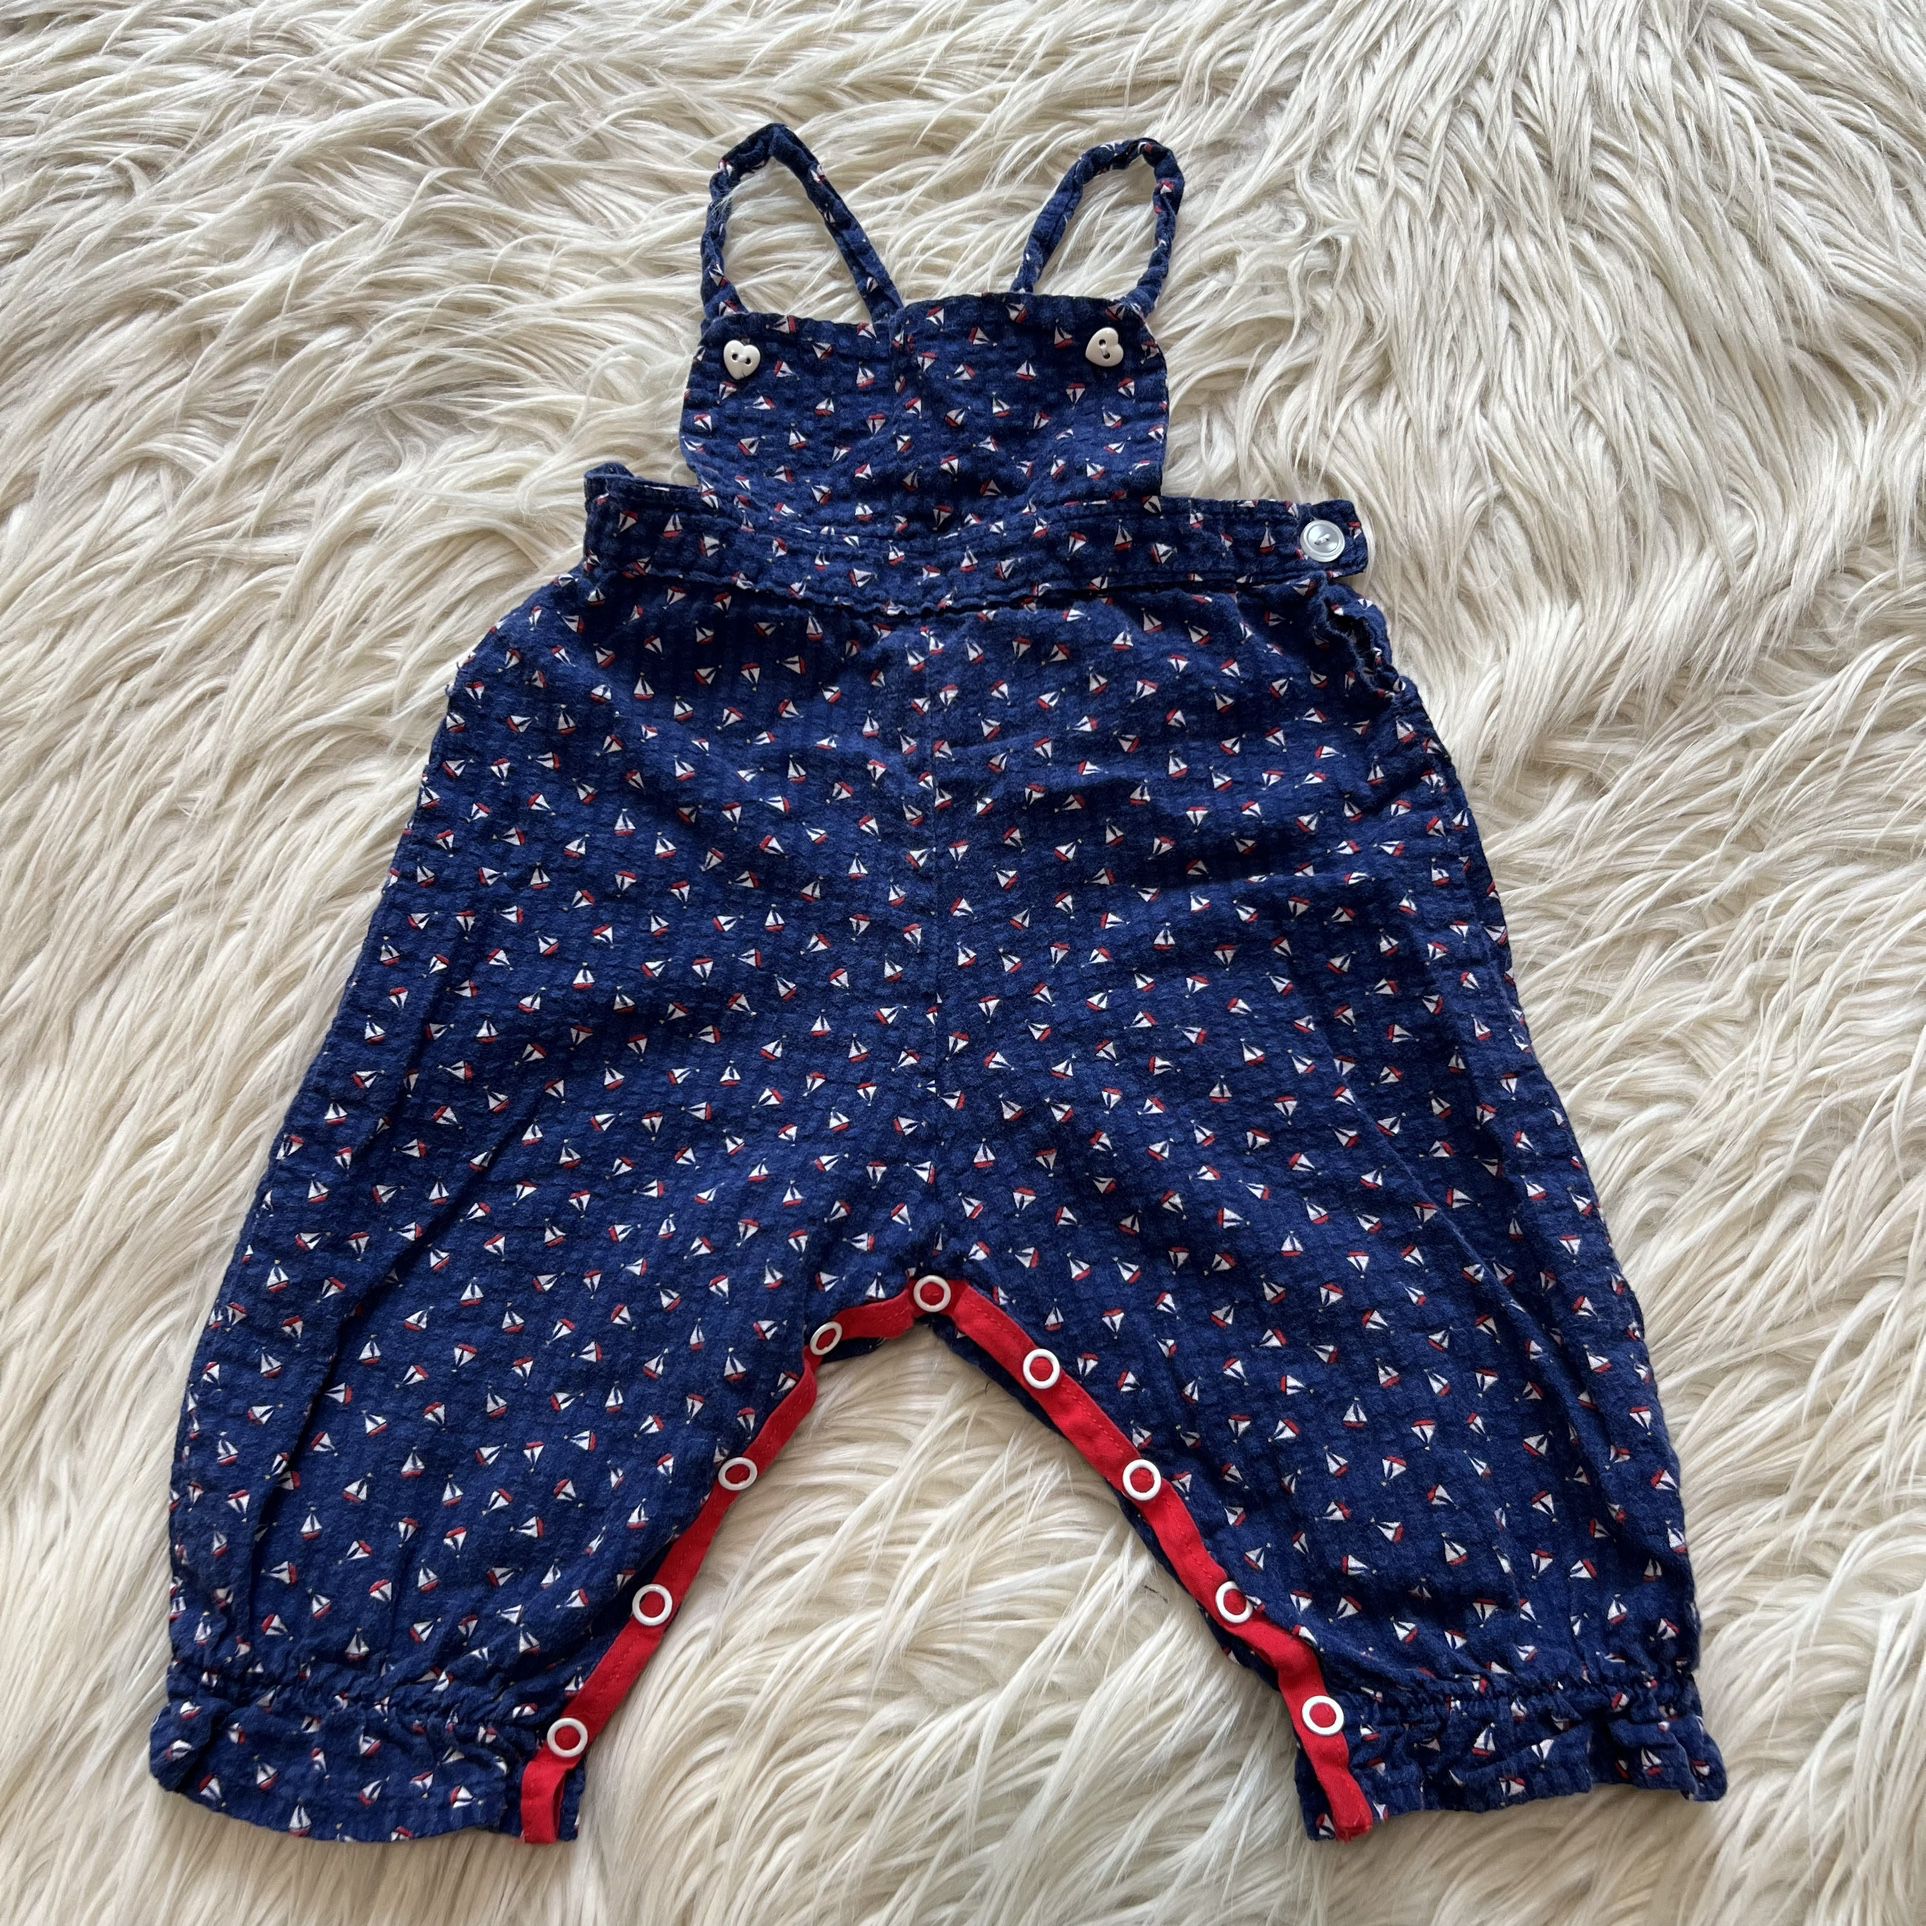 Vintage 90s Sailboat Print Overalls Summer Heart Buttons Blue Baby 3-6 Months